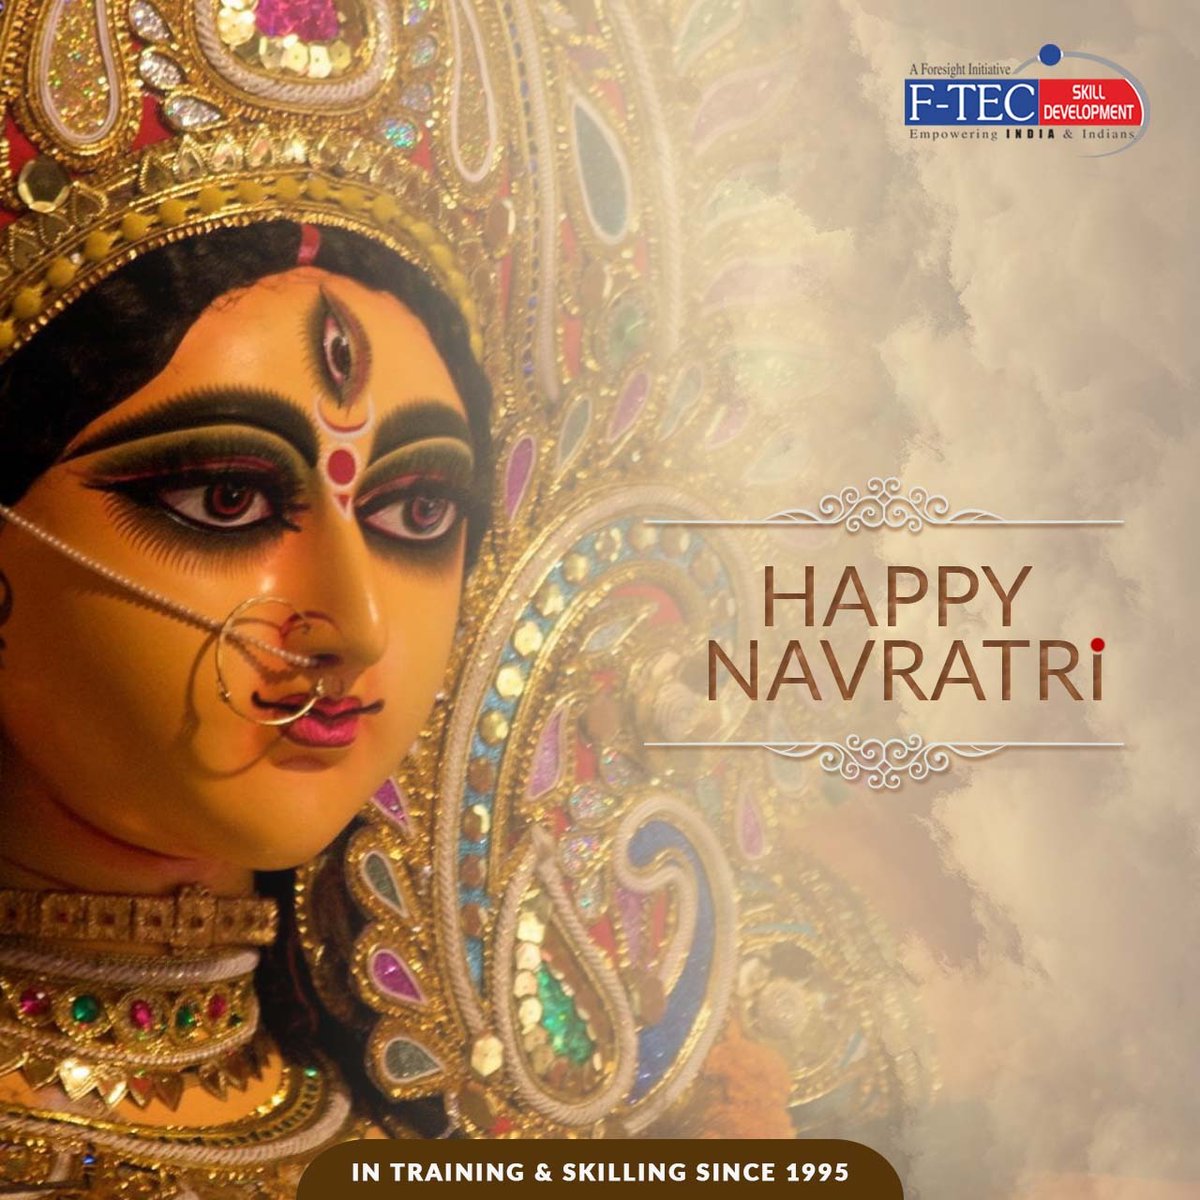 On the auspicious occasion of Navratri, F-TEC wishes everyone good health & prosperity. May the Goddess grace us all with her divine presence & blessings. 
Happy Navratri.

#happynavratri #navratrifestival #navratri2021 #navratrivibes #navratriutsav #navratricelebration